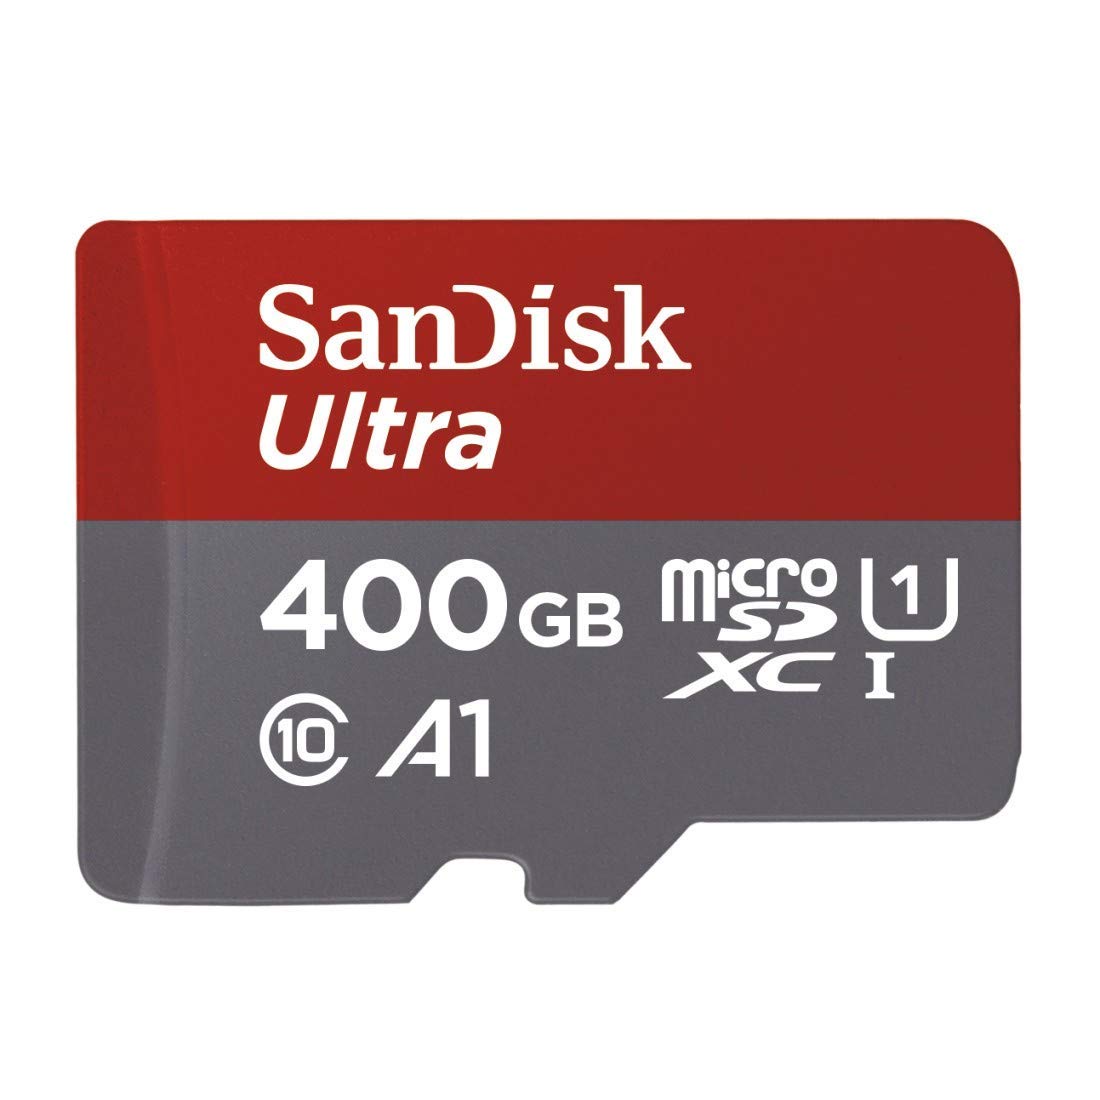 Sandisk Ultra 400GB Micro SDXC UHS-I Card with Adapter - SDSQUAR-400G-GN6MA